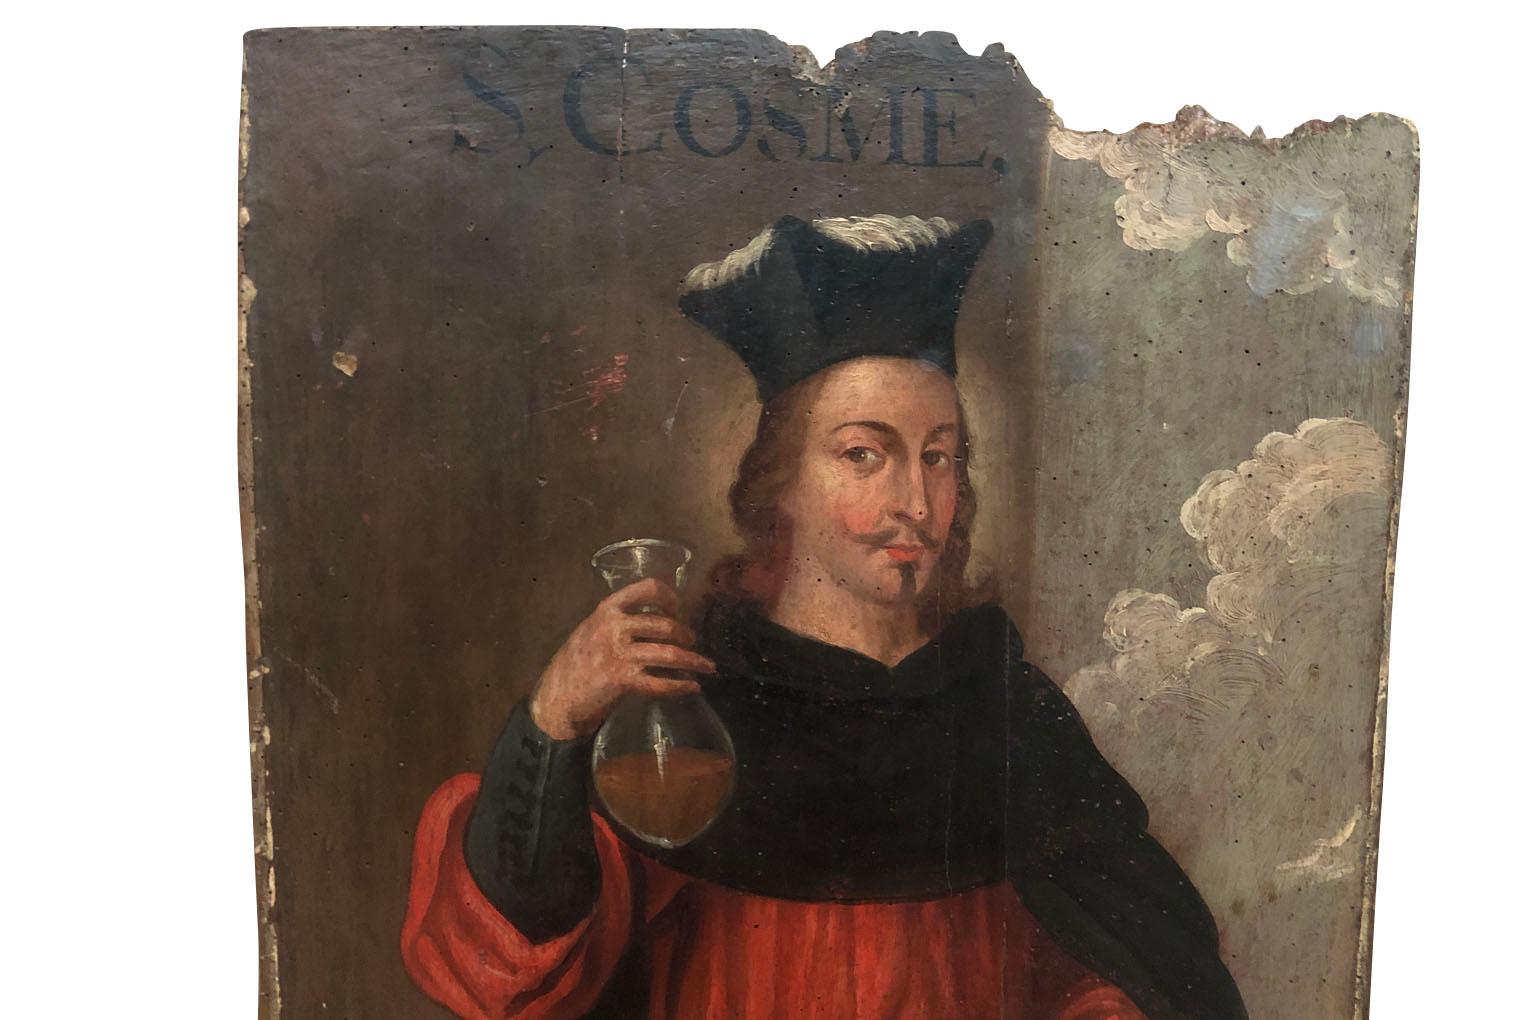 A wonderful Spanish early 17th century painting on board of Saint Cosmas. Legend has it that St. Cosmas and his twin brother Damian, were skilled doctors and treated the sick without charging for their services. Saint Cosmas and Saint Damian are the